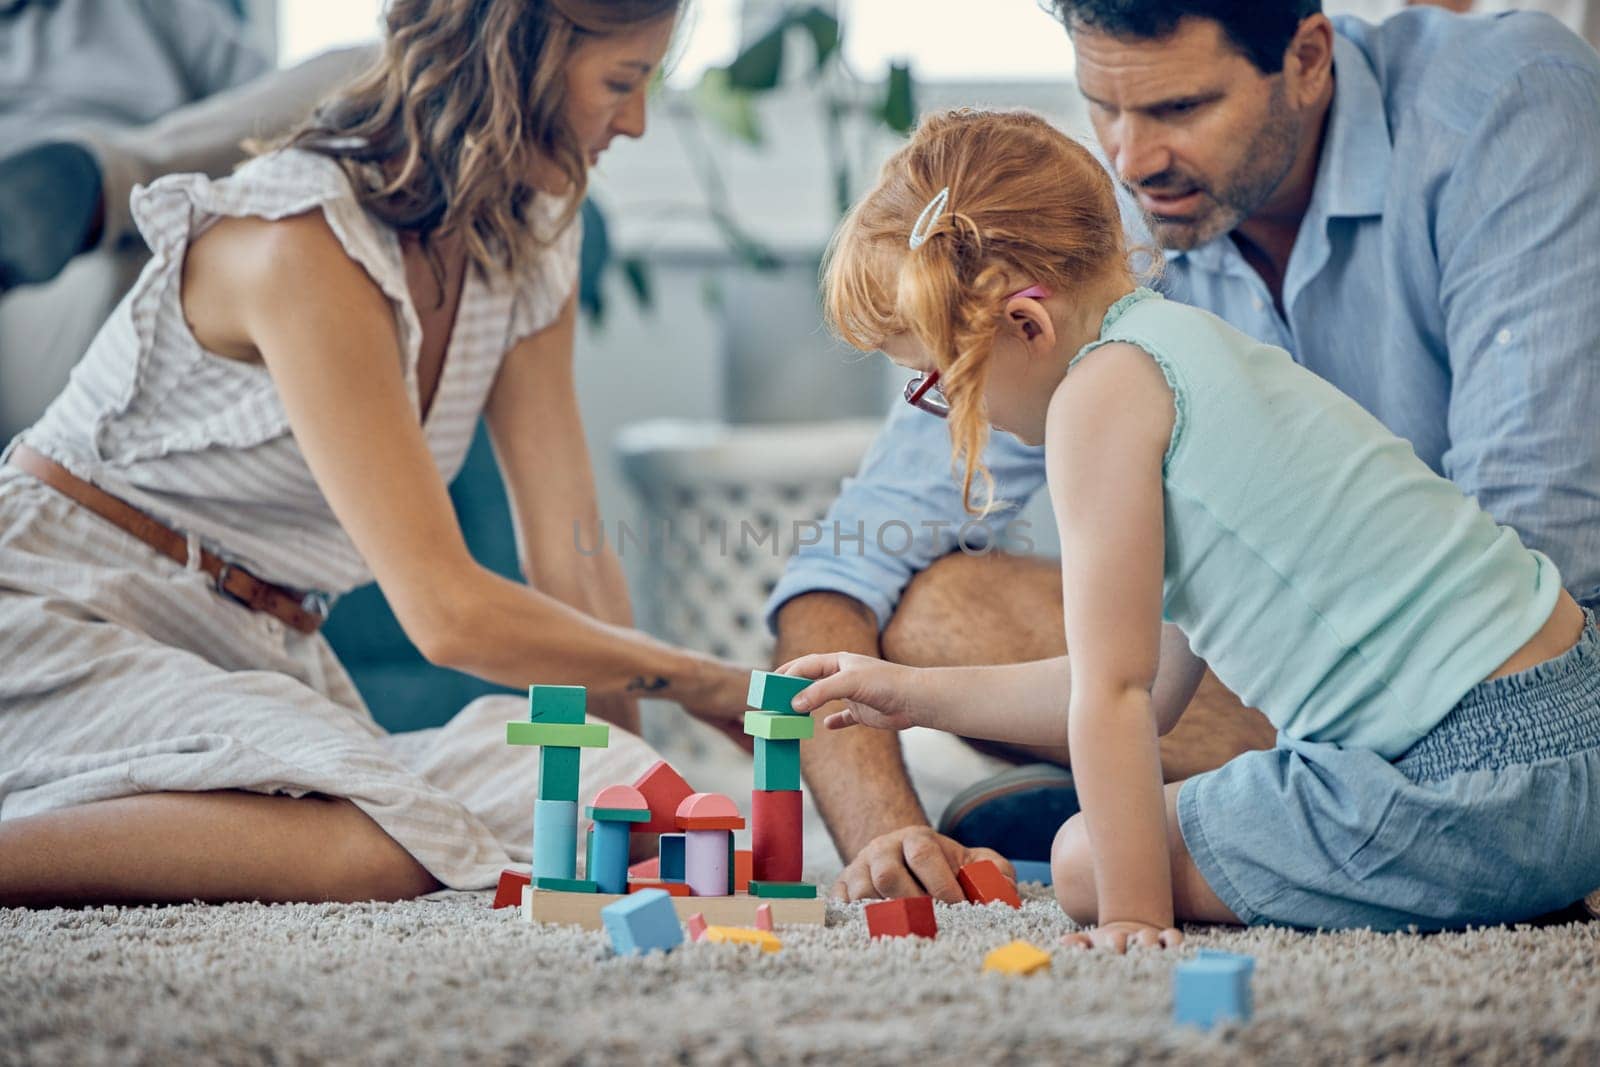 Family, building blocks and girl playing or learning in home, having fun and bonding with parents. Development, love and support of caring father and mother with kid enjoying toys together in house